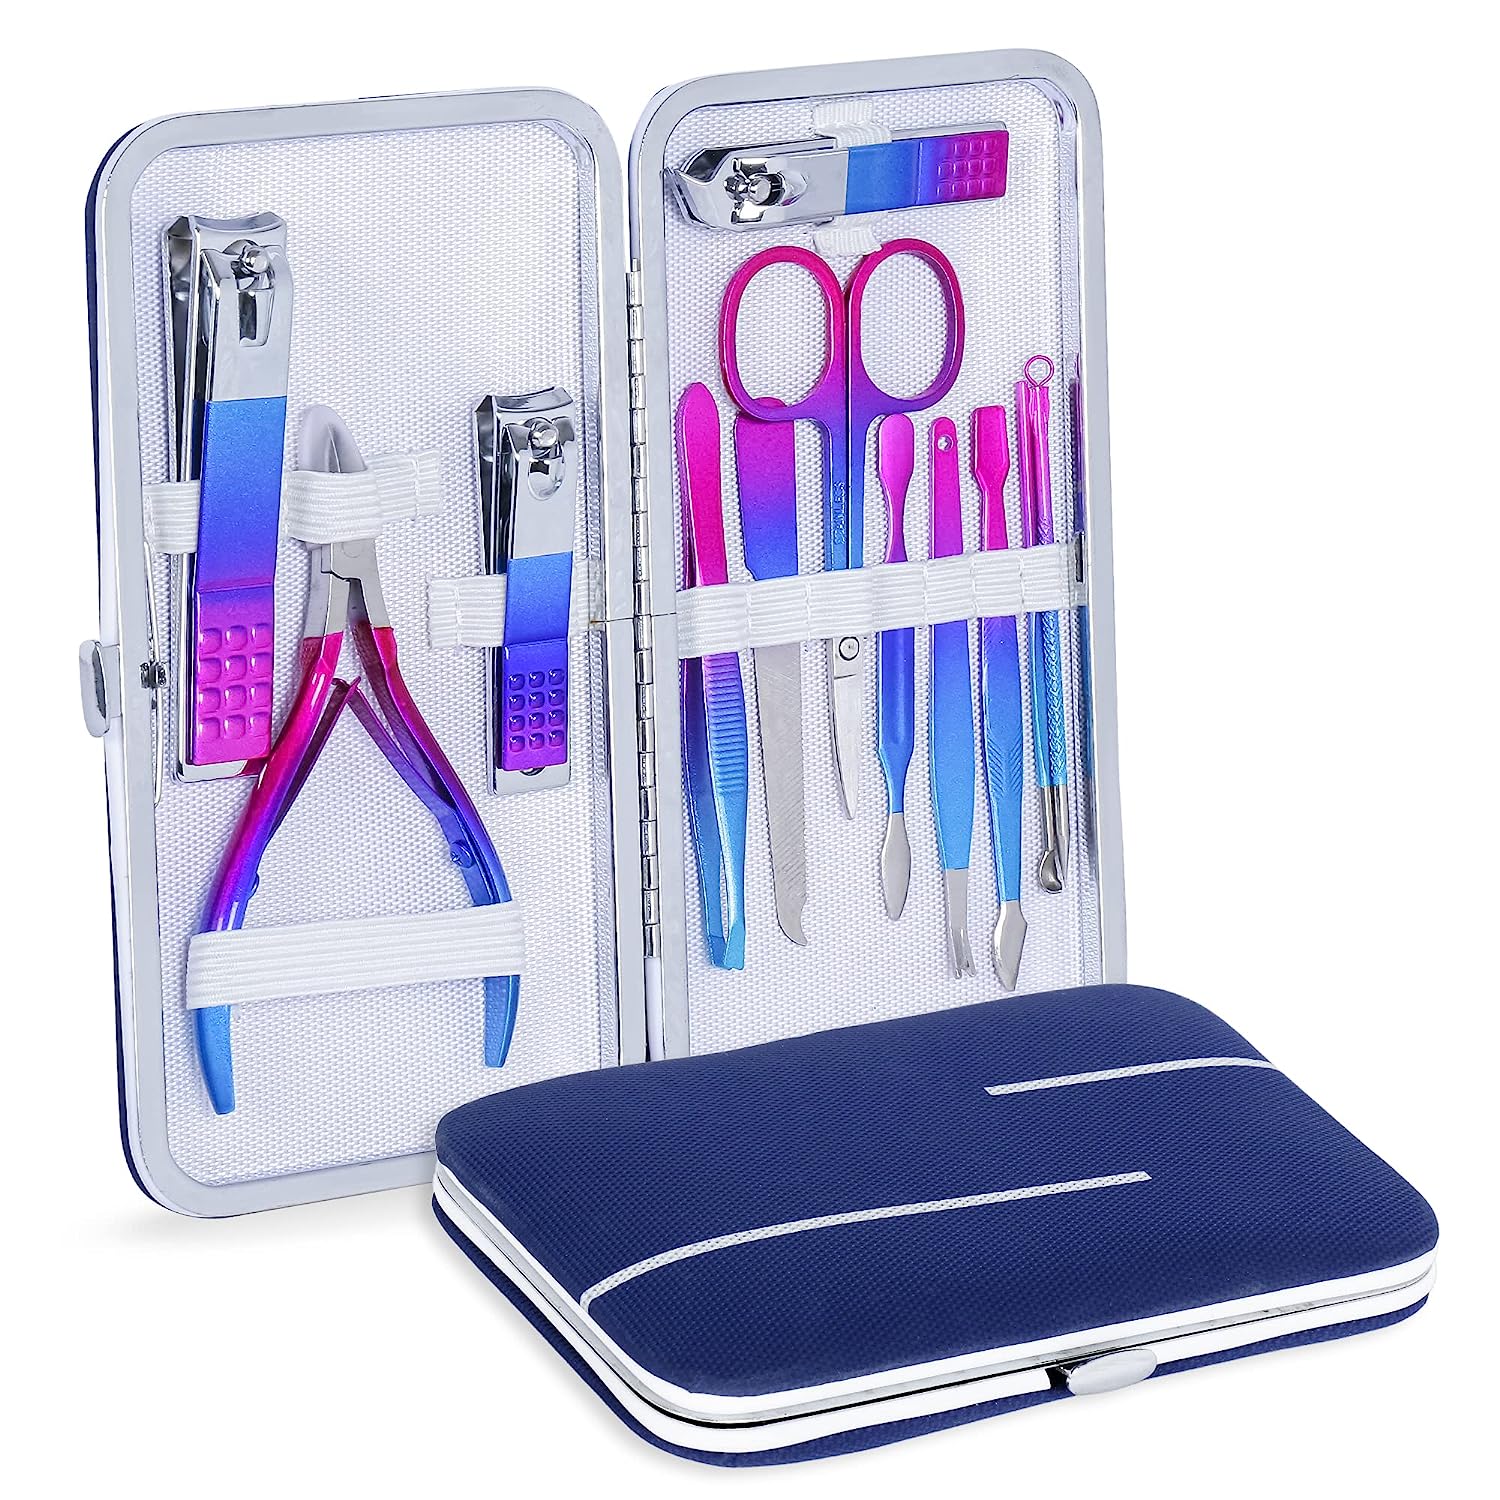 WOAMA Manicure Set 30 In 1 Pedicure Kit Nail Clippers Set Manicure Kit  Professional Stainless Steel Nail Kit For Women - Pink : Amazon.in: Health  & Personal Care